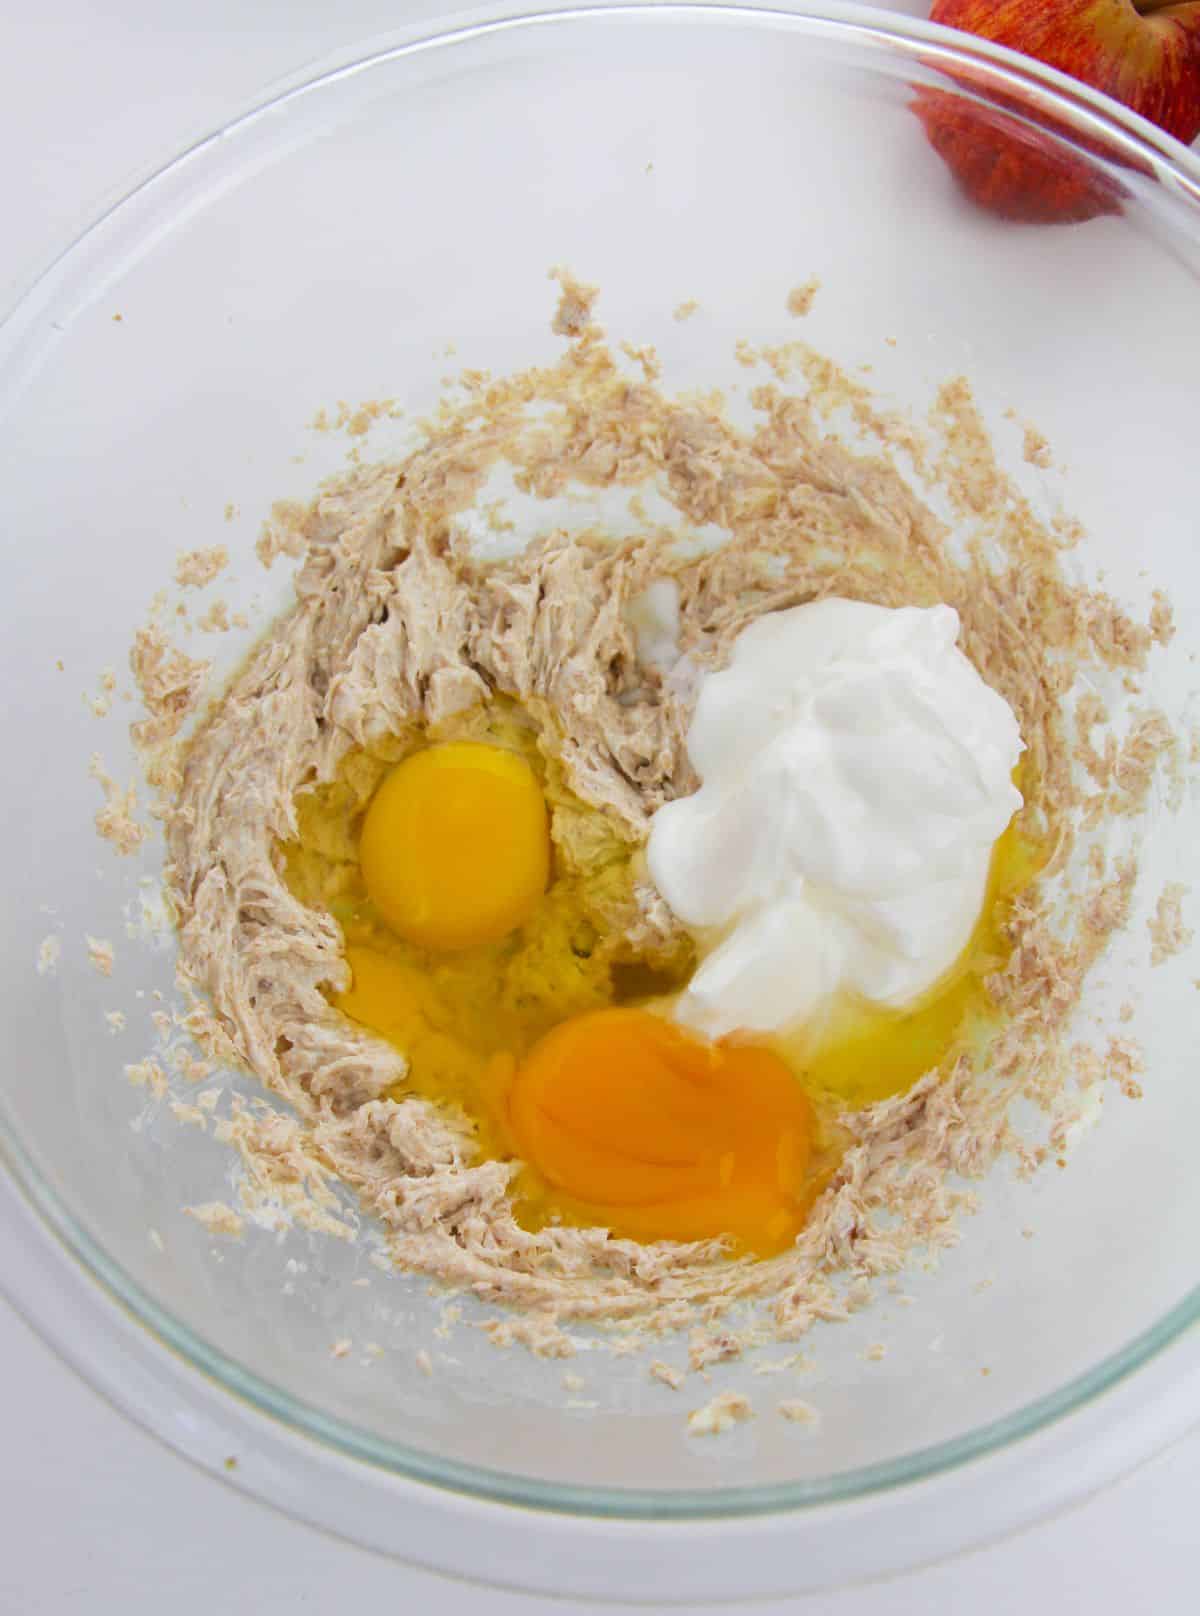 Eggs and Greek yogurt are added to the mixture in a mixing bowl.